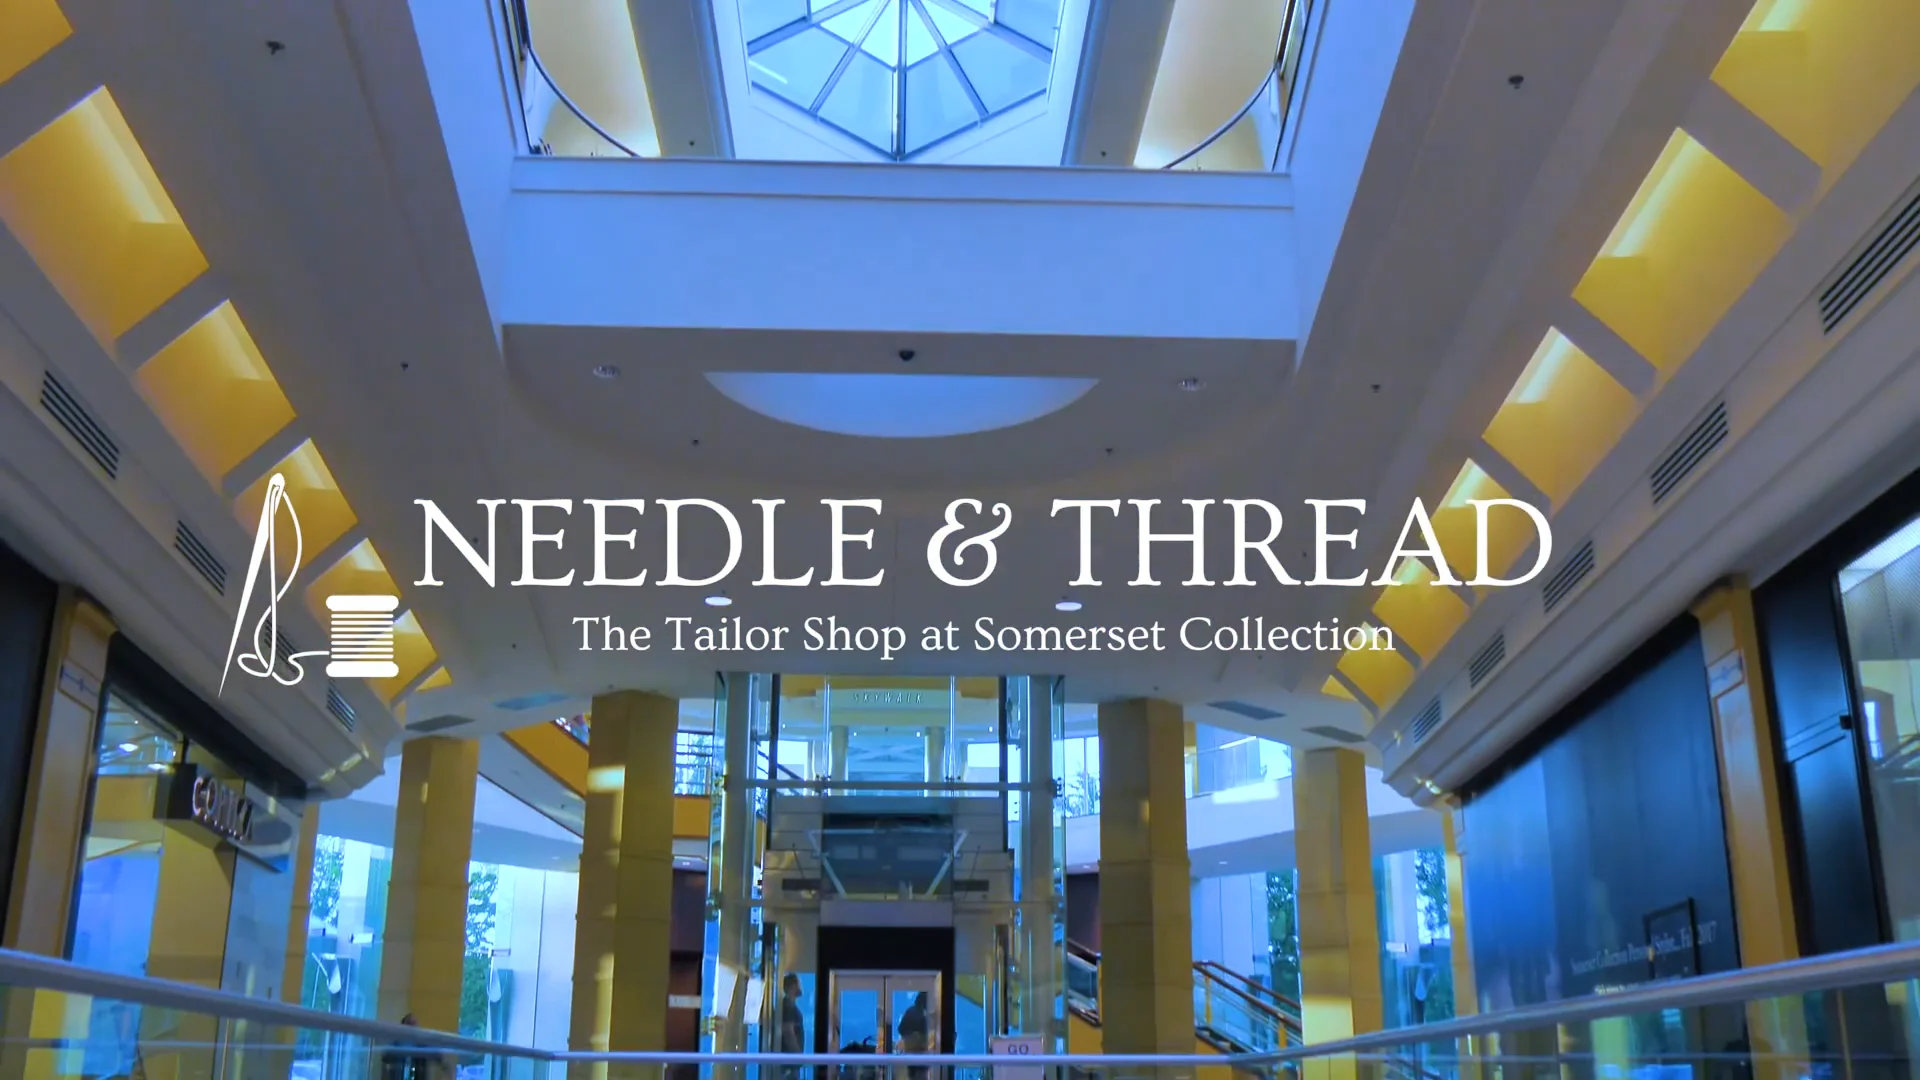 Needle & Thread - The Tailor Shop at Somerset Collection on Vimeo